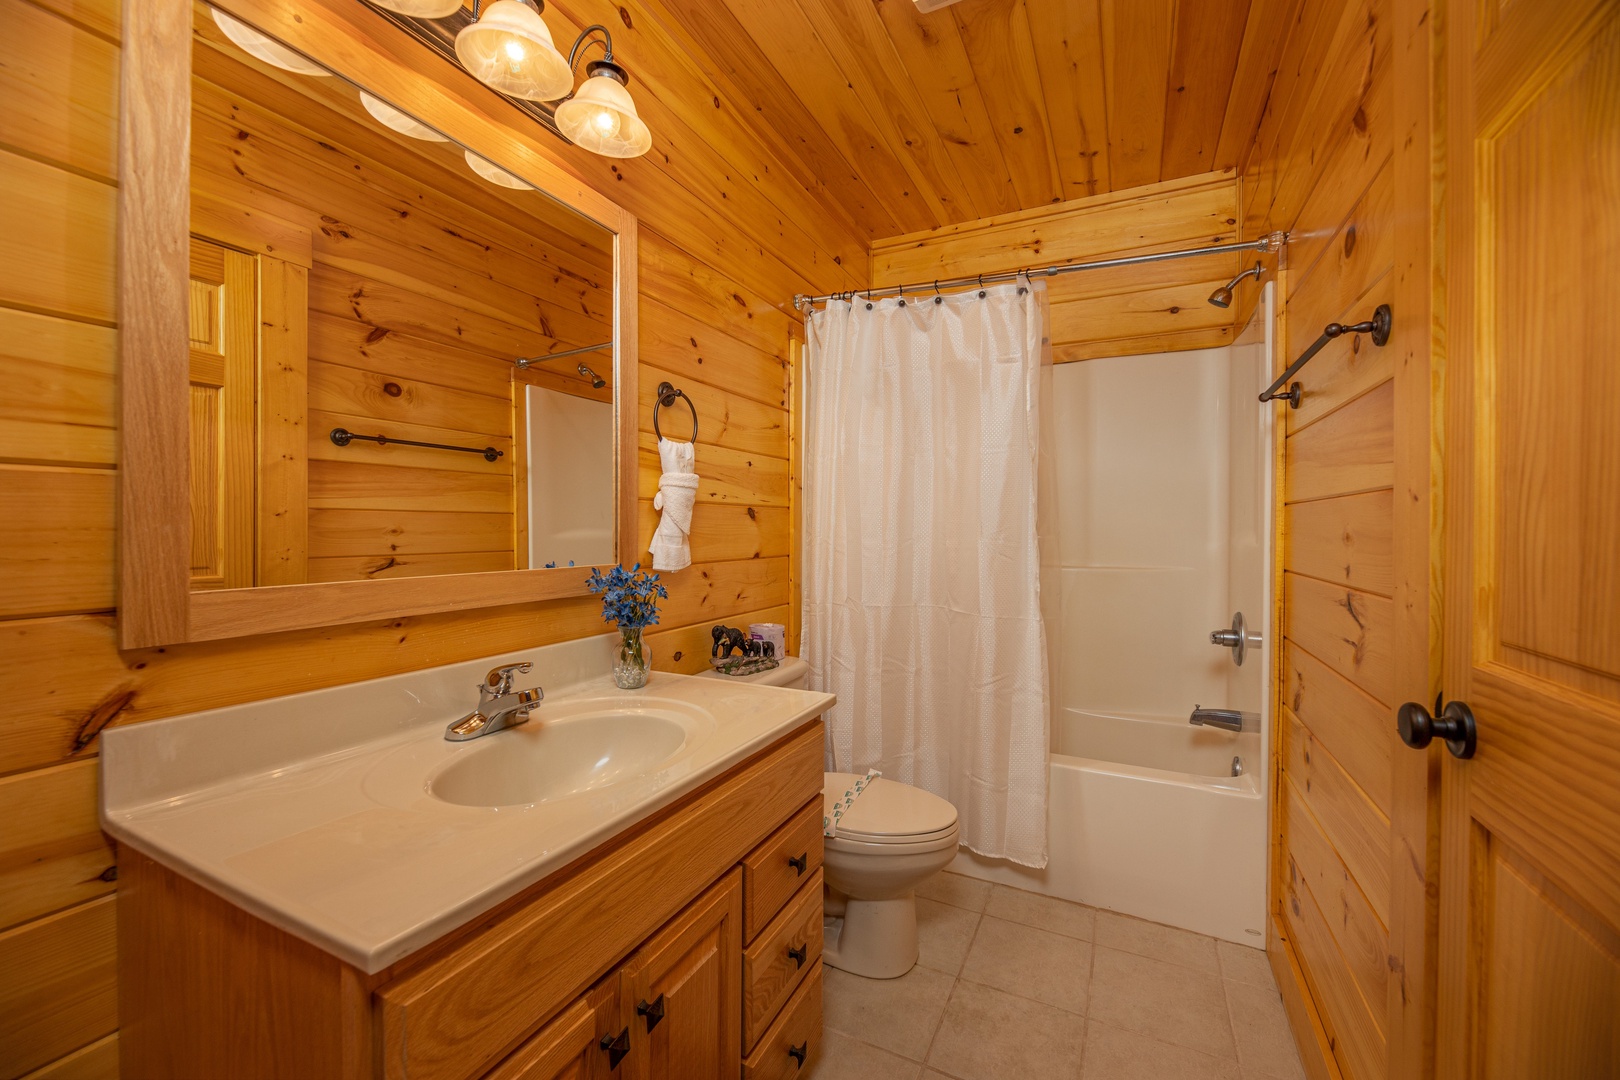 Bathroom with a tub and shower at Sensational Views, a 3 bedroom cabin rental located in Gatlinburg